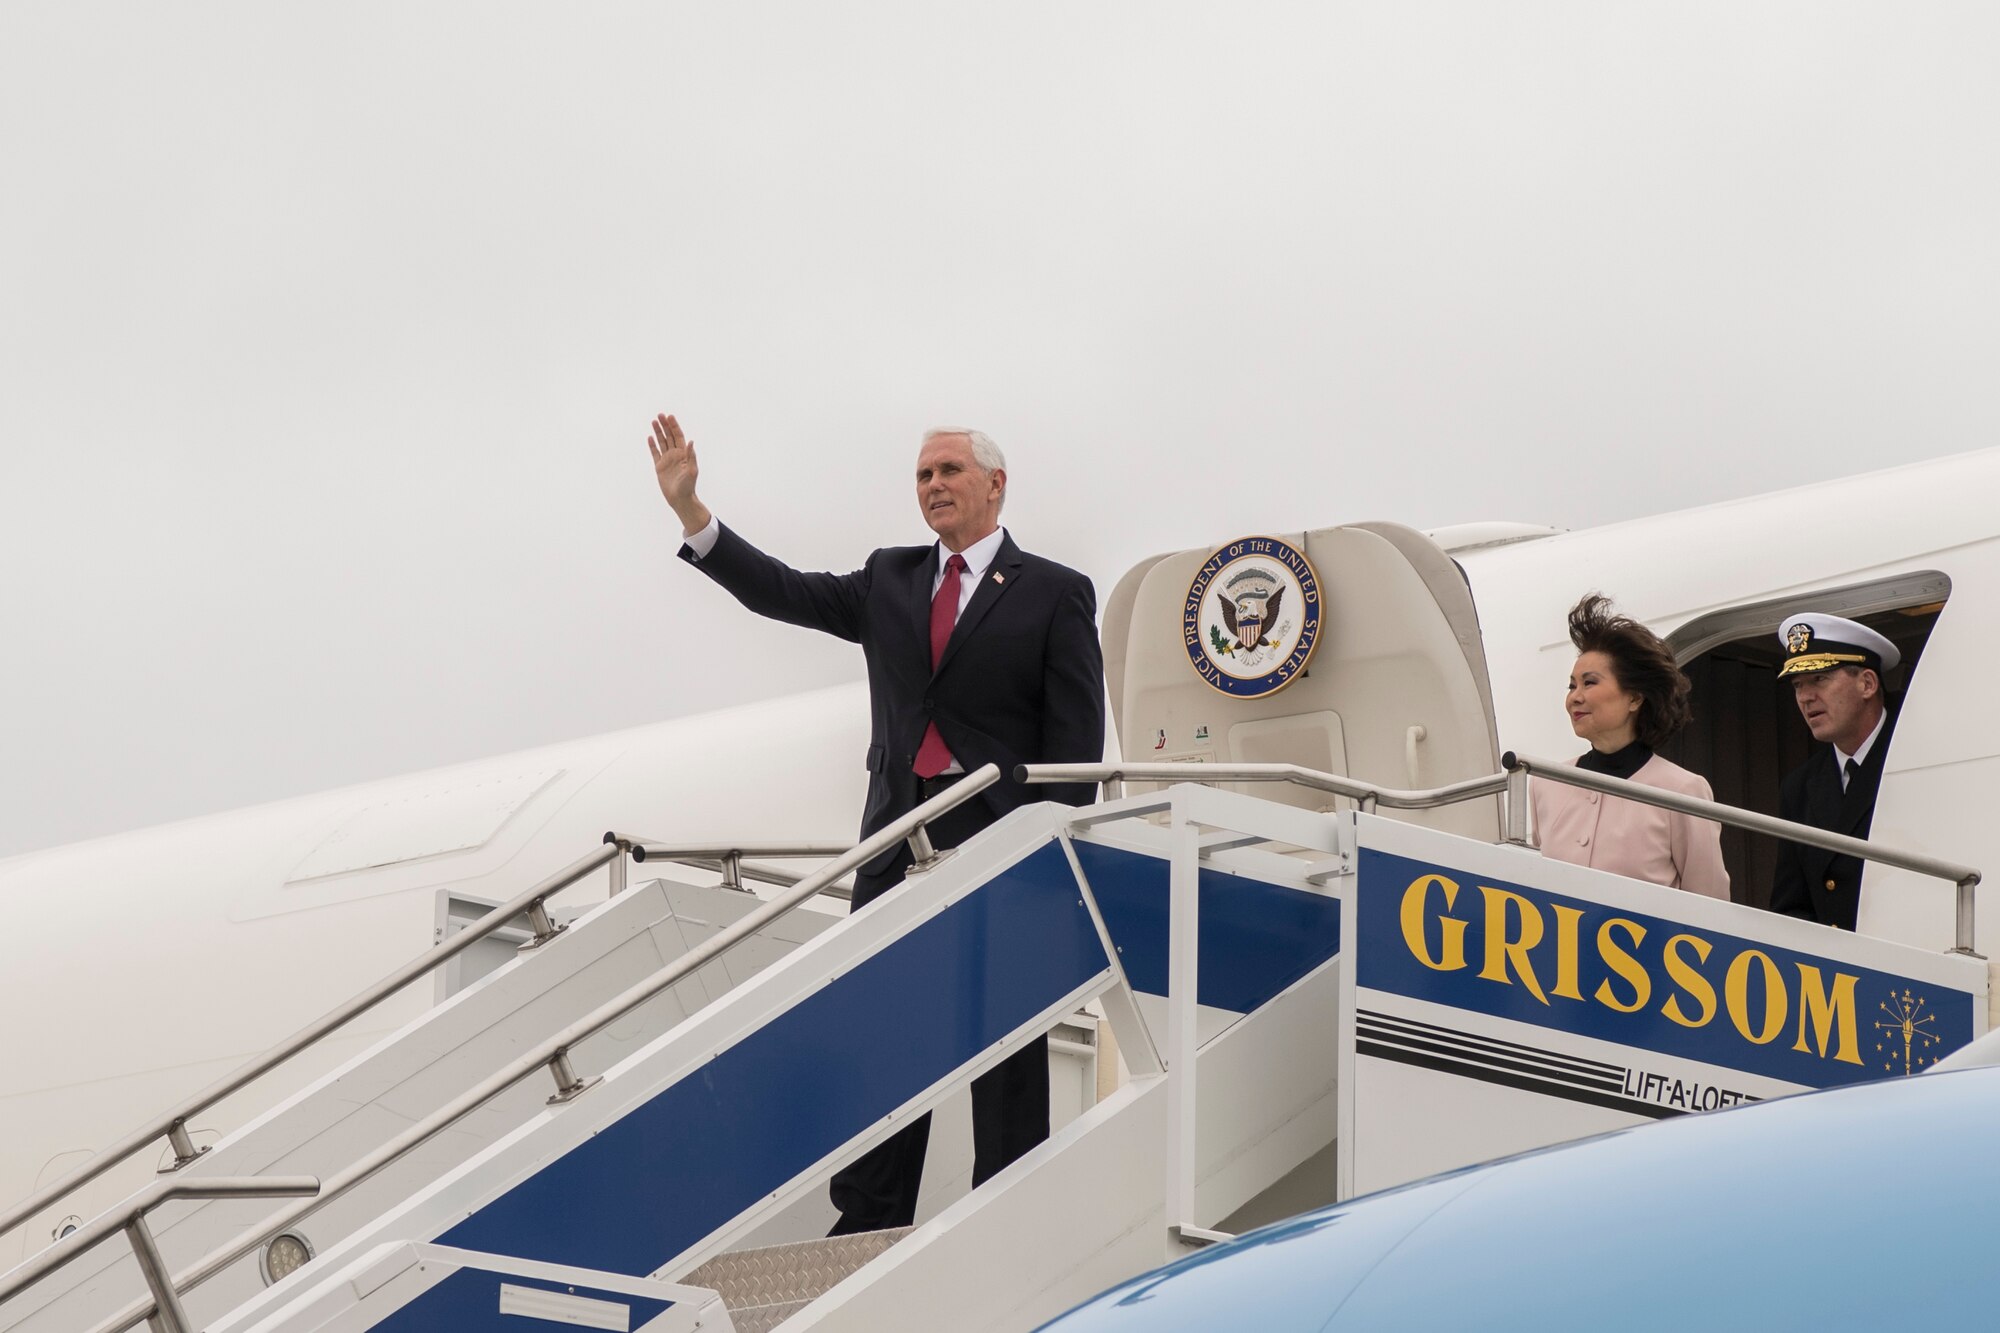 Vice President Mike Pence waves to news media after arriving at Grissom Air Reserve Base, Indiana April 30, 2020.Pence came to Indiana to meet with local business leaders who are building ventilators during the COVID-19 outbreak. (U.S Air Force photo/Ben Mota)